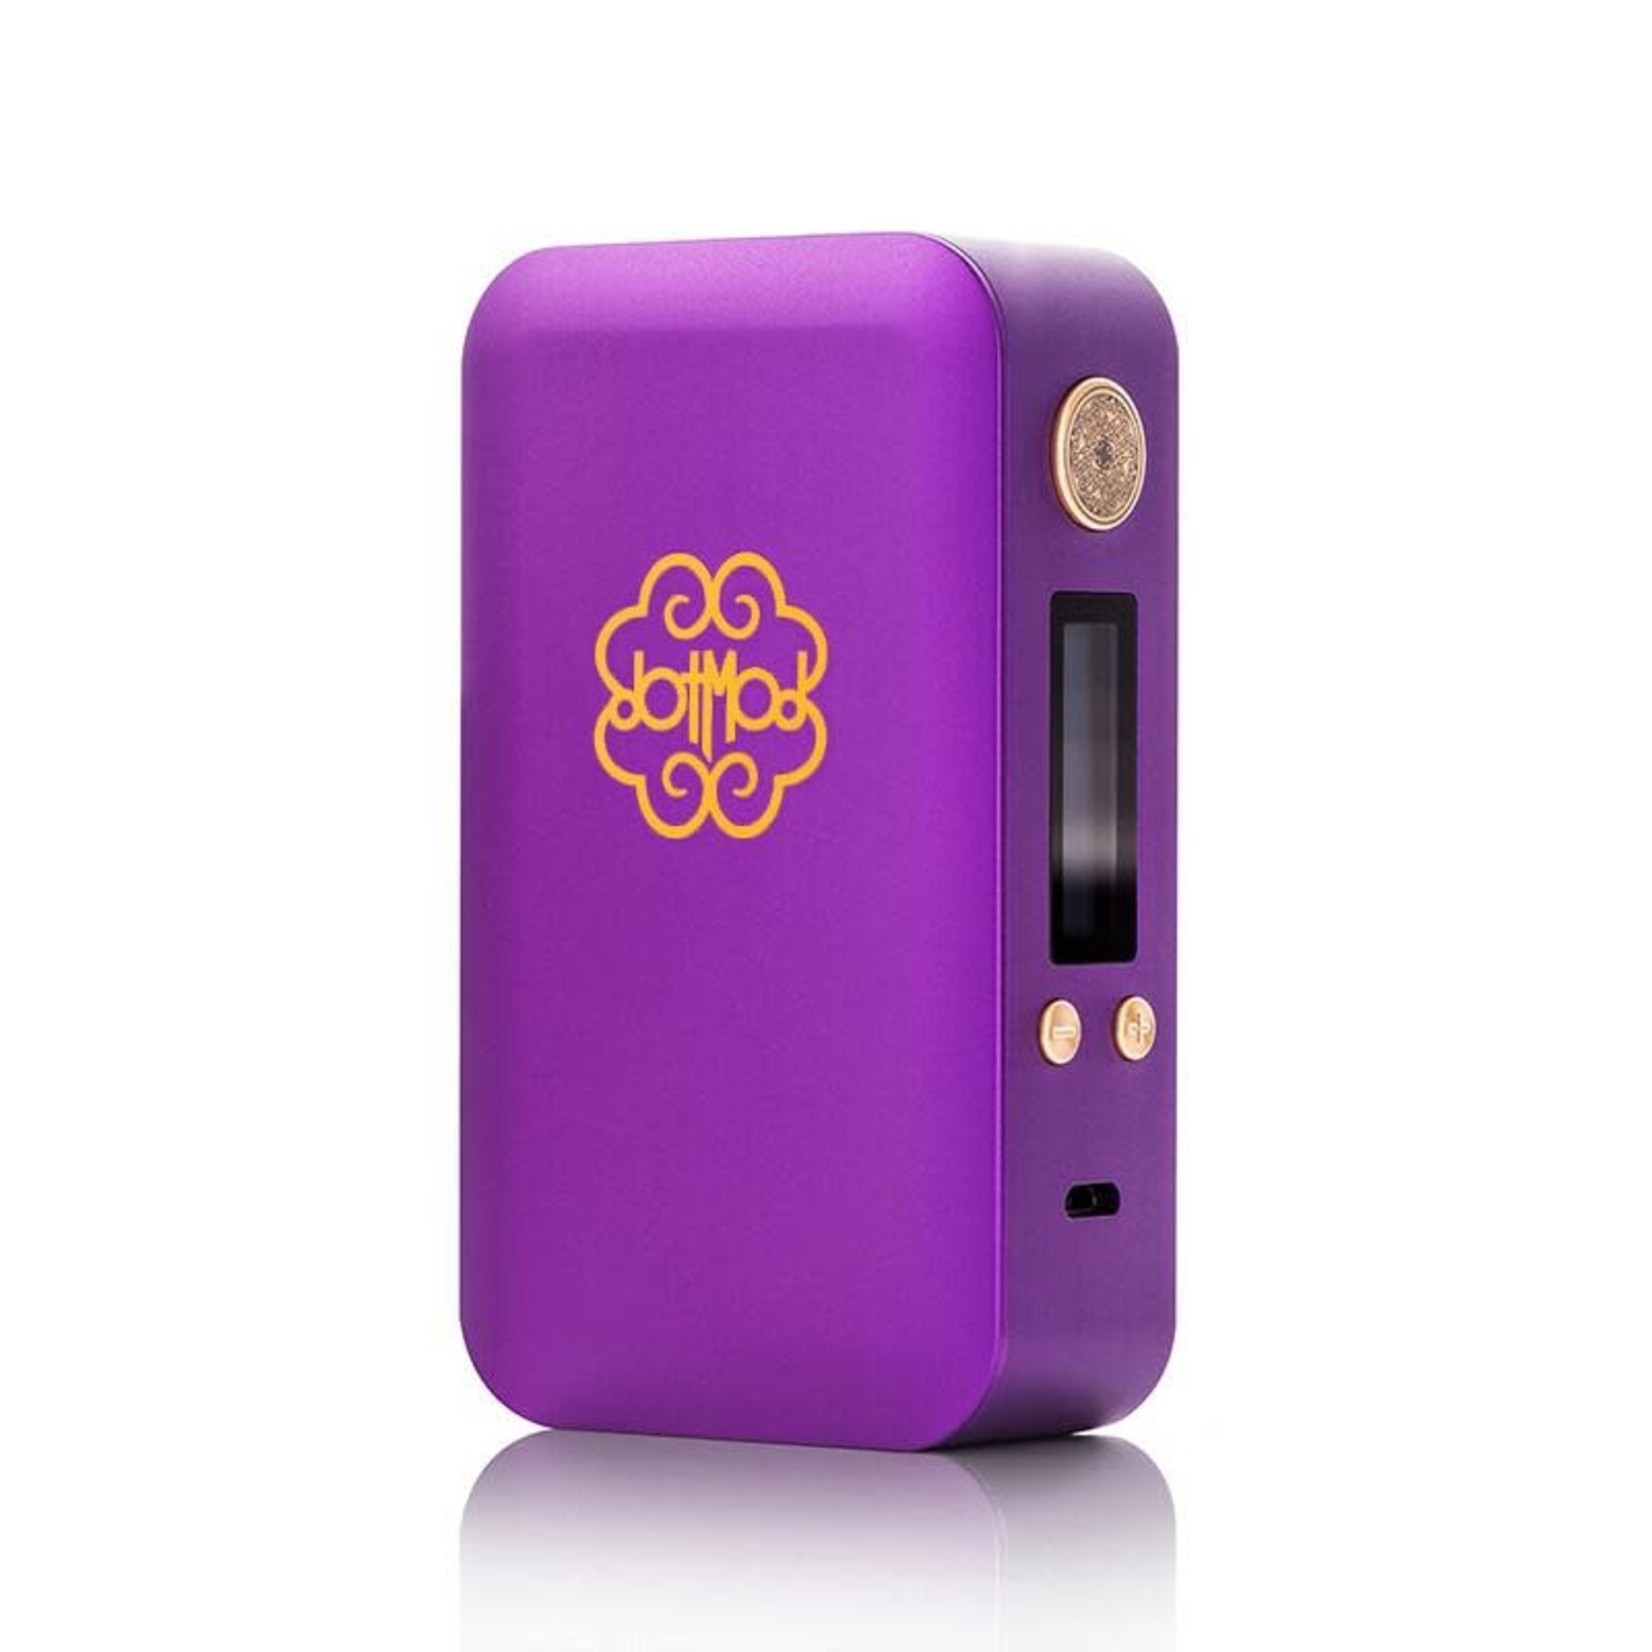 dotMod dotBox 200w Limited Release